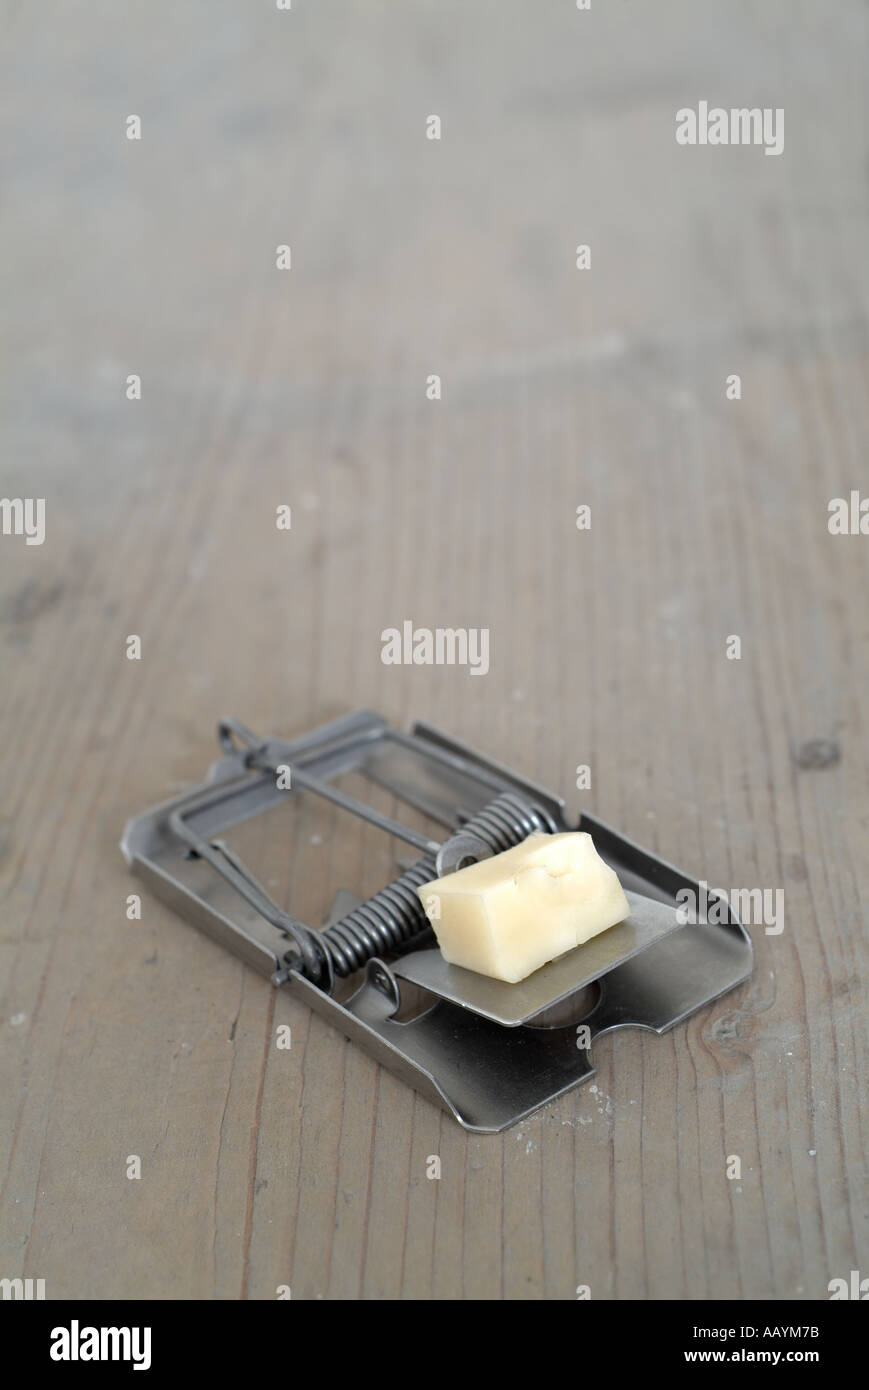 https://c8.alamy.com/comp/AAYM7B/mouse-trap-baited-with-cheese-AAYM7B.jpg